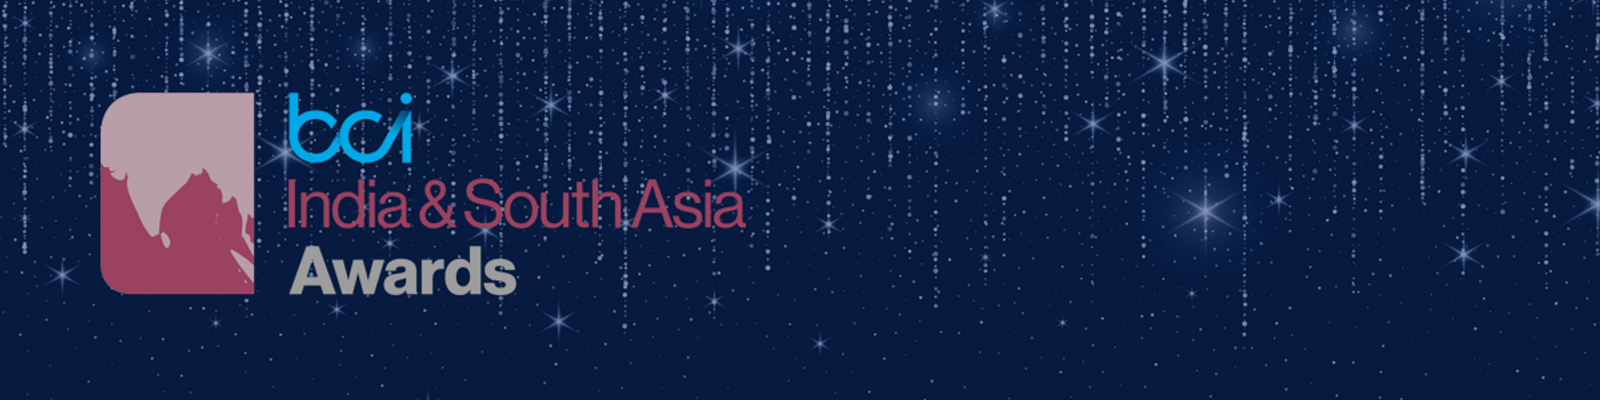 India&SouthAsia_banner.png